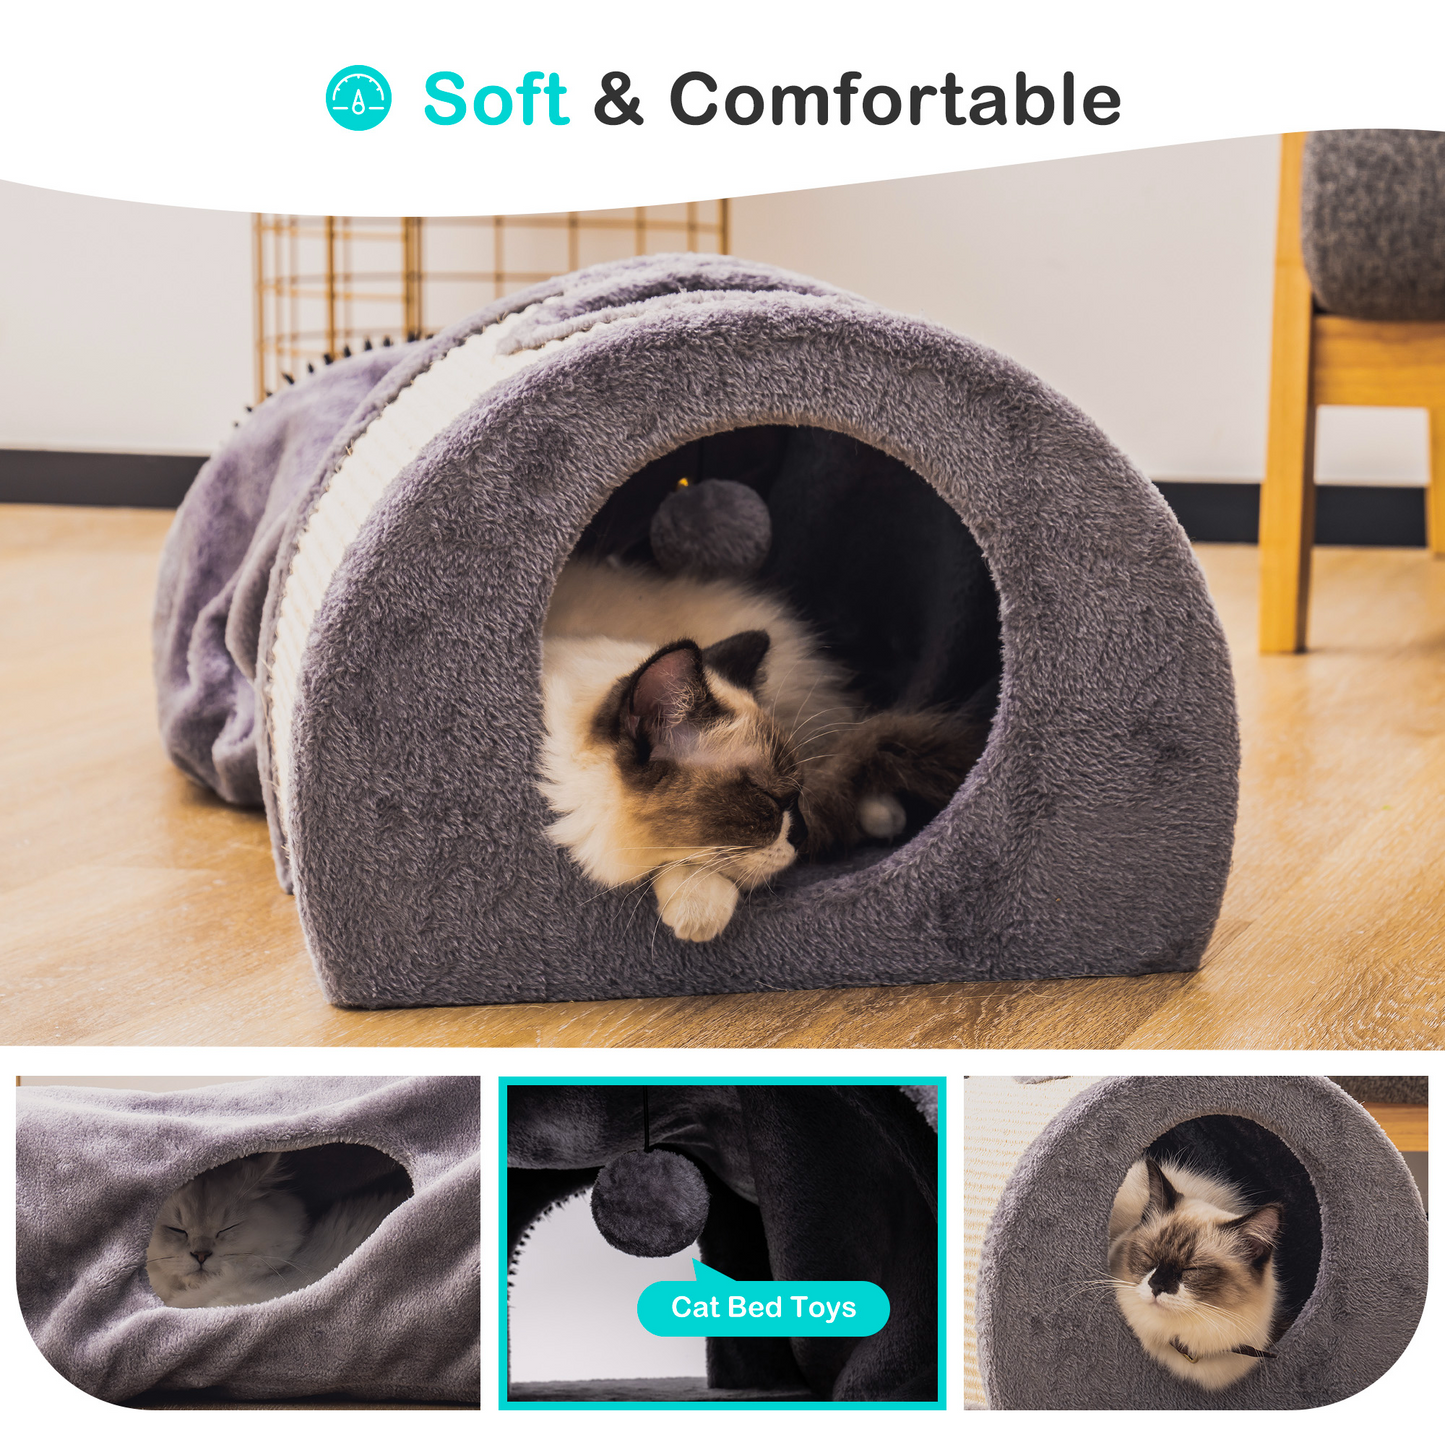 Mewoofun Cat Tunnel Cat Bed Toys Soft Comfortable Multifunction Groomer Massage Sturdy Sisal Carpet Support US Dropshipping